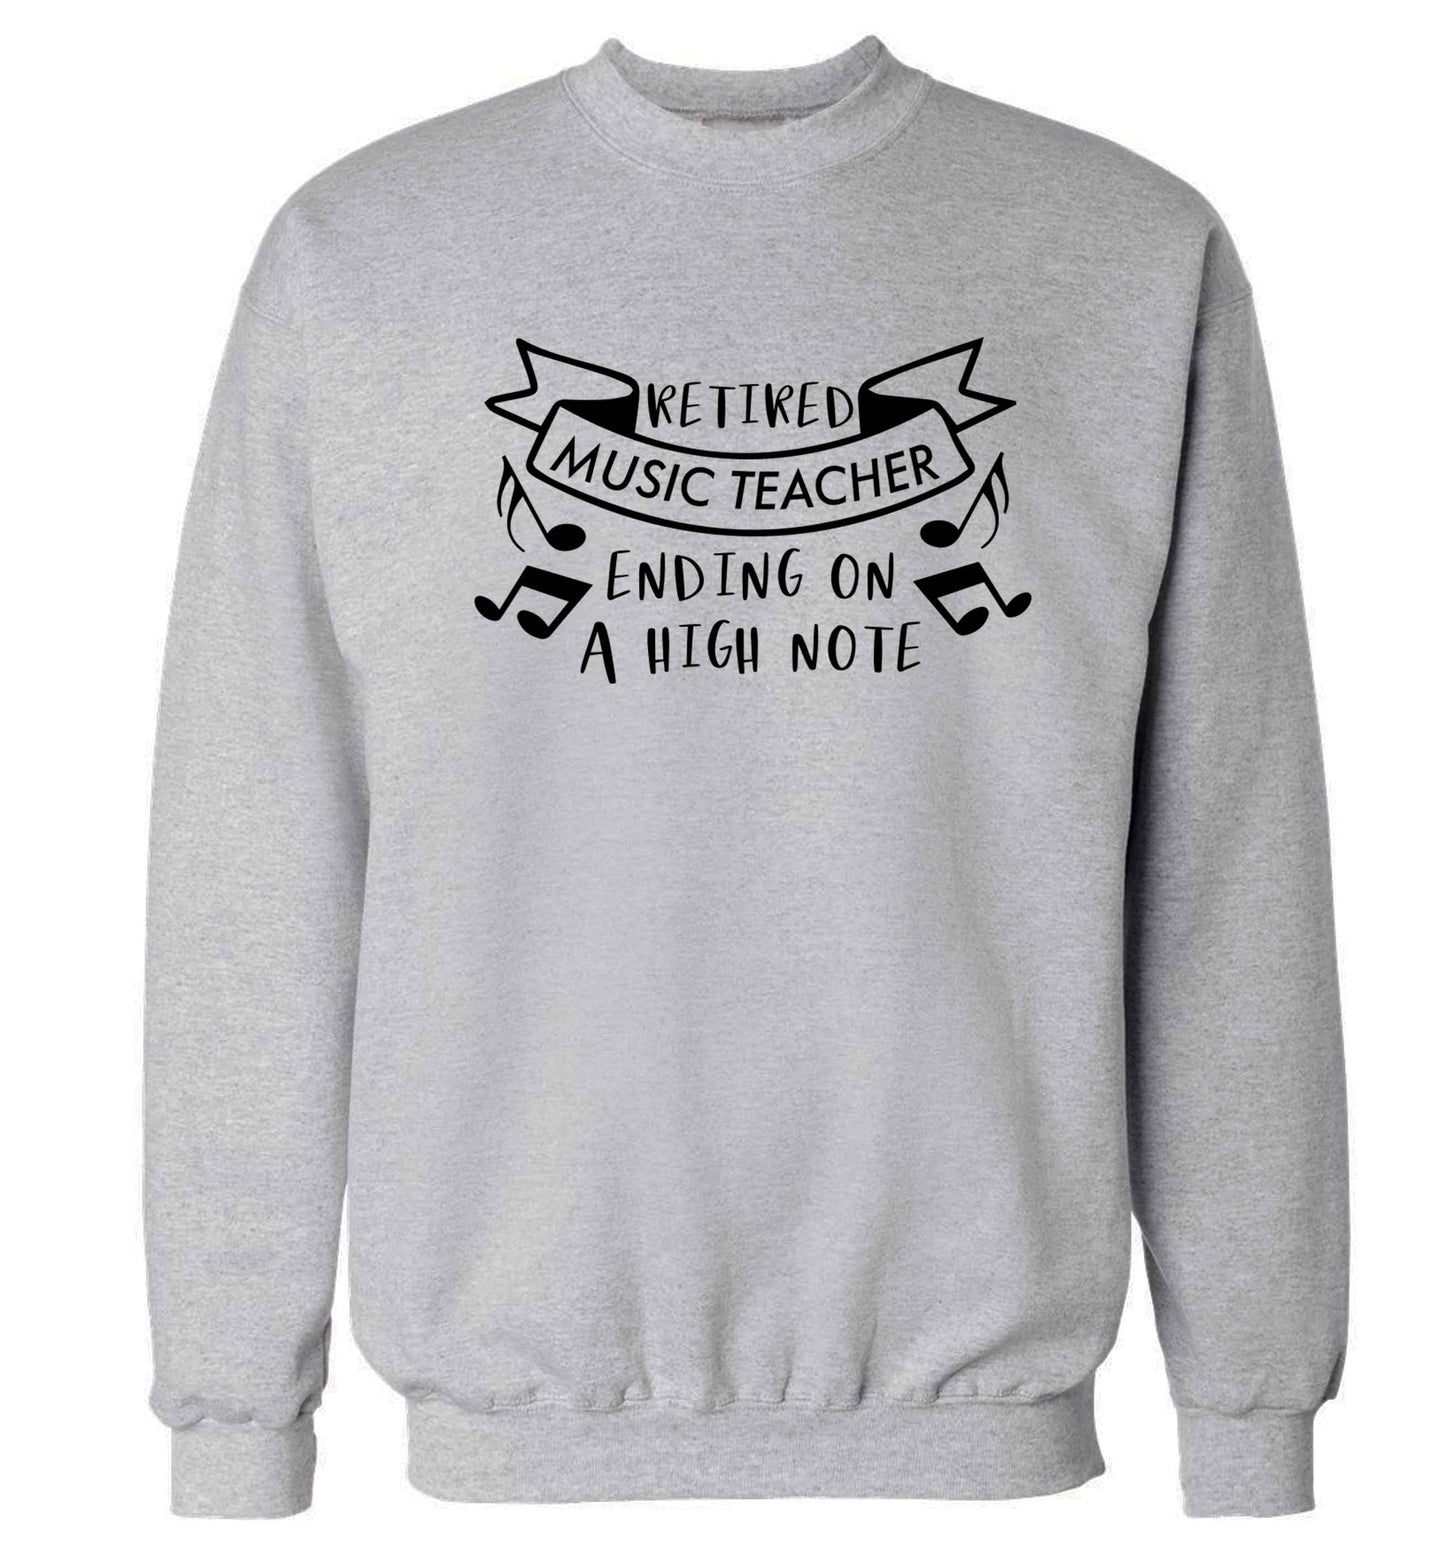 Retired music teacher ending on a high note Adult's unisex grey Sweater 2XL